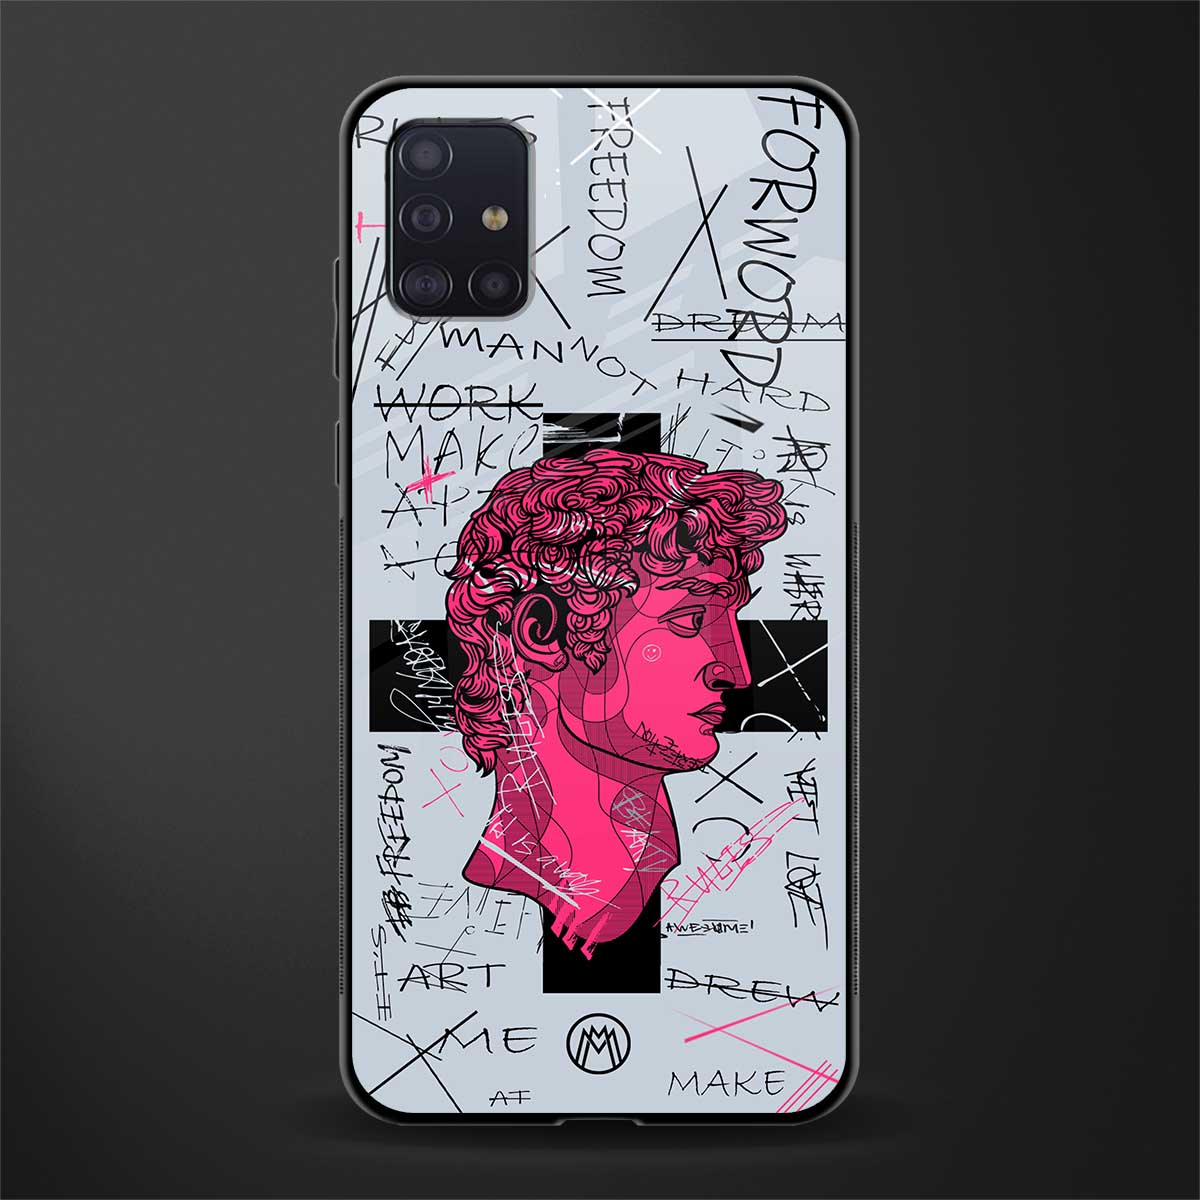 lost in reality david glass case for samsung galaxy a71 image